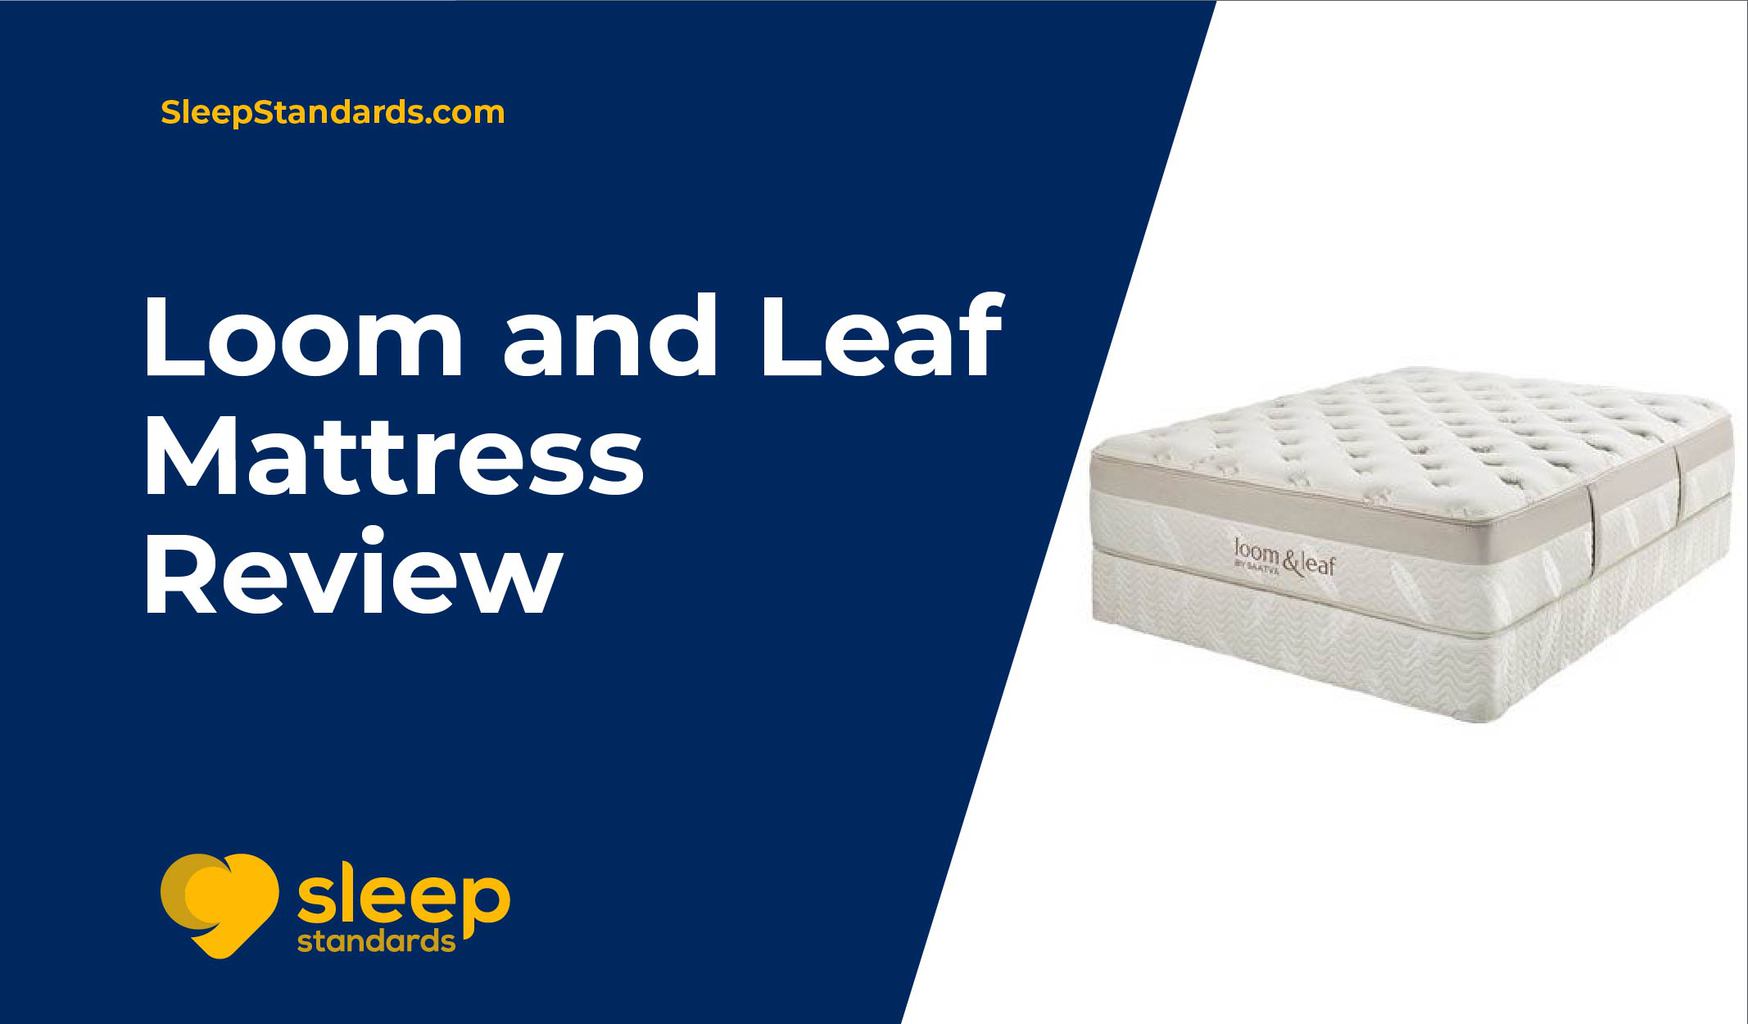 Loom and leaf Mattress Review